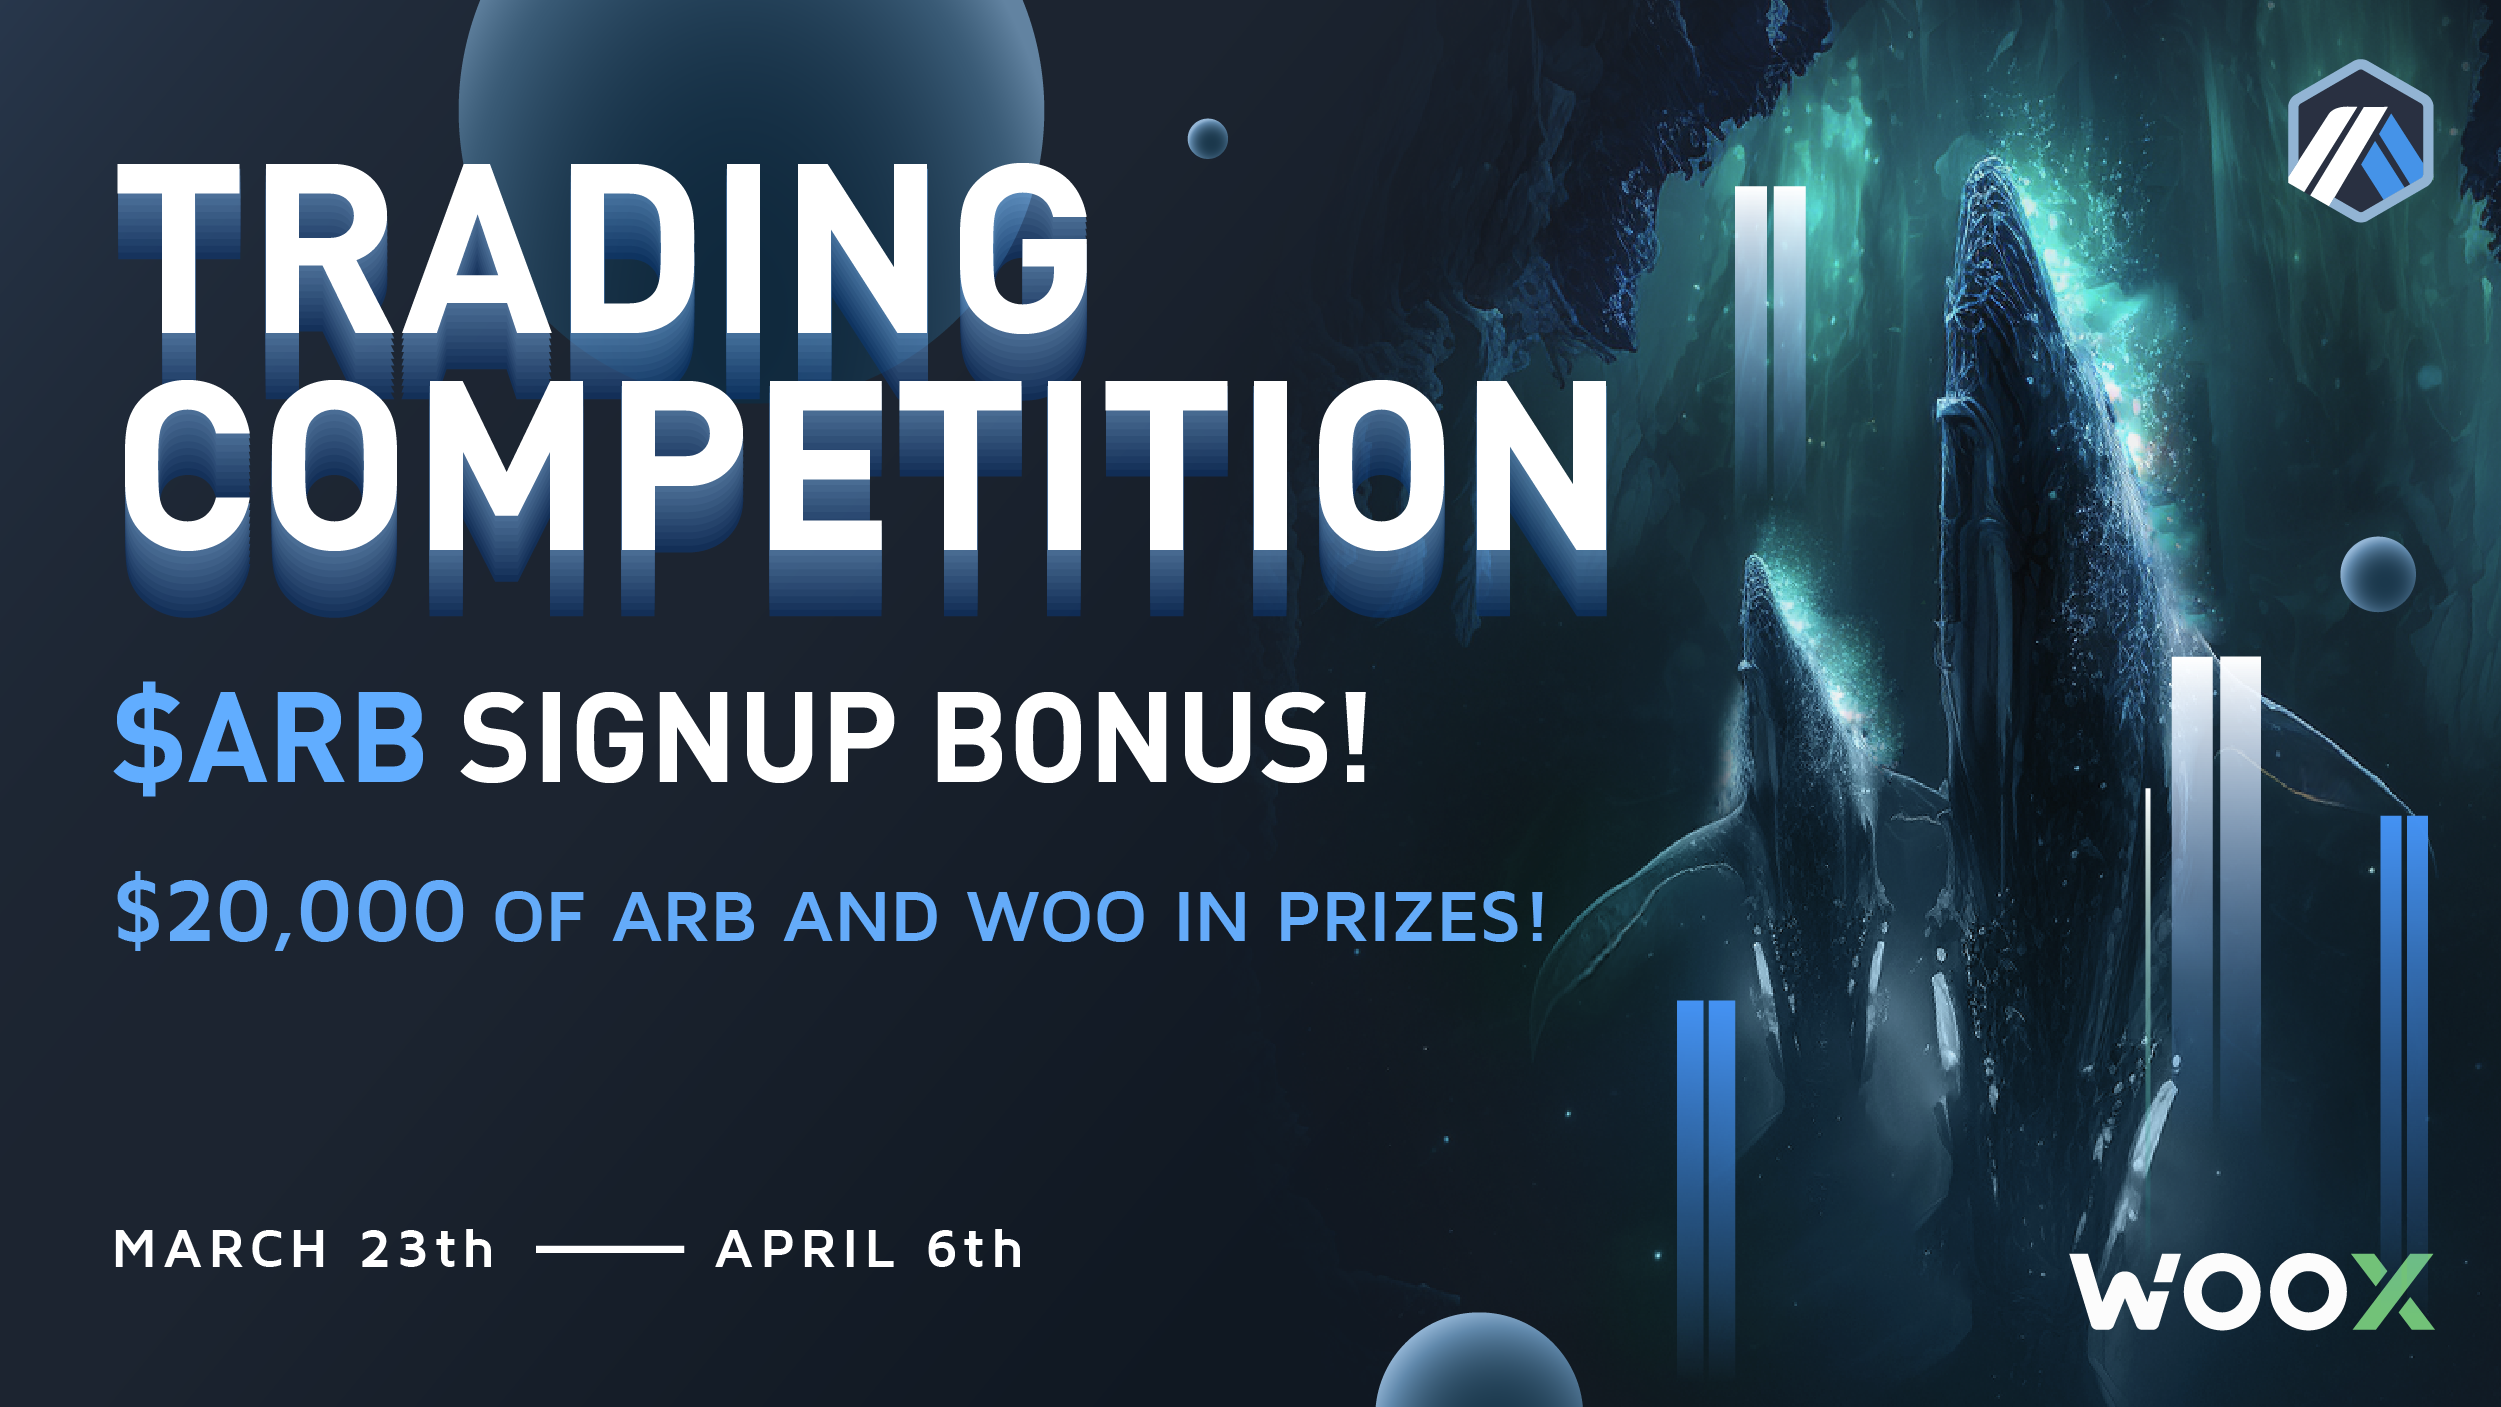 $ARB Trading Competition and signup bonus: Sign up and trade on WOO X to share a prize pool of $20,000 in $ARB and $WOO!